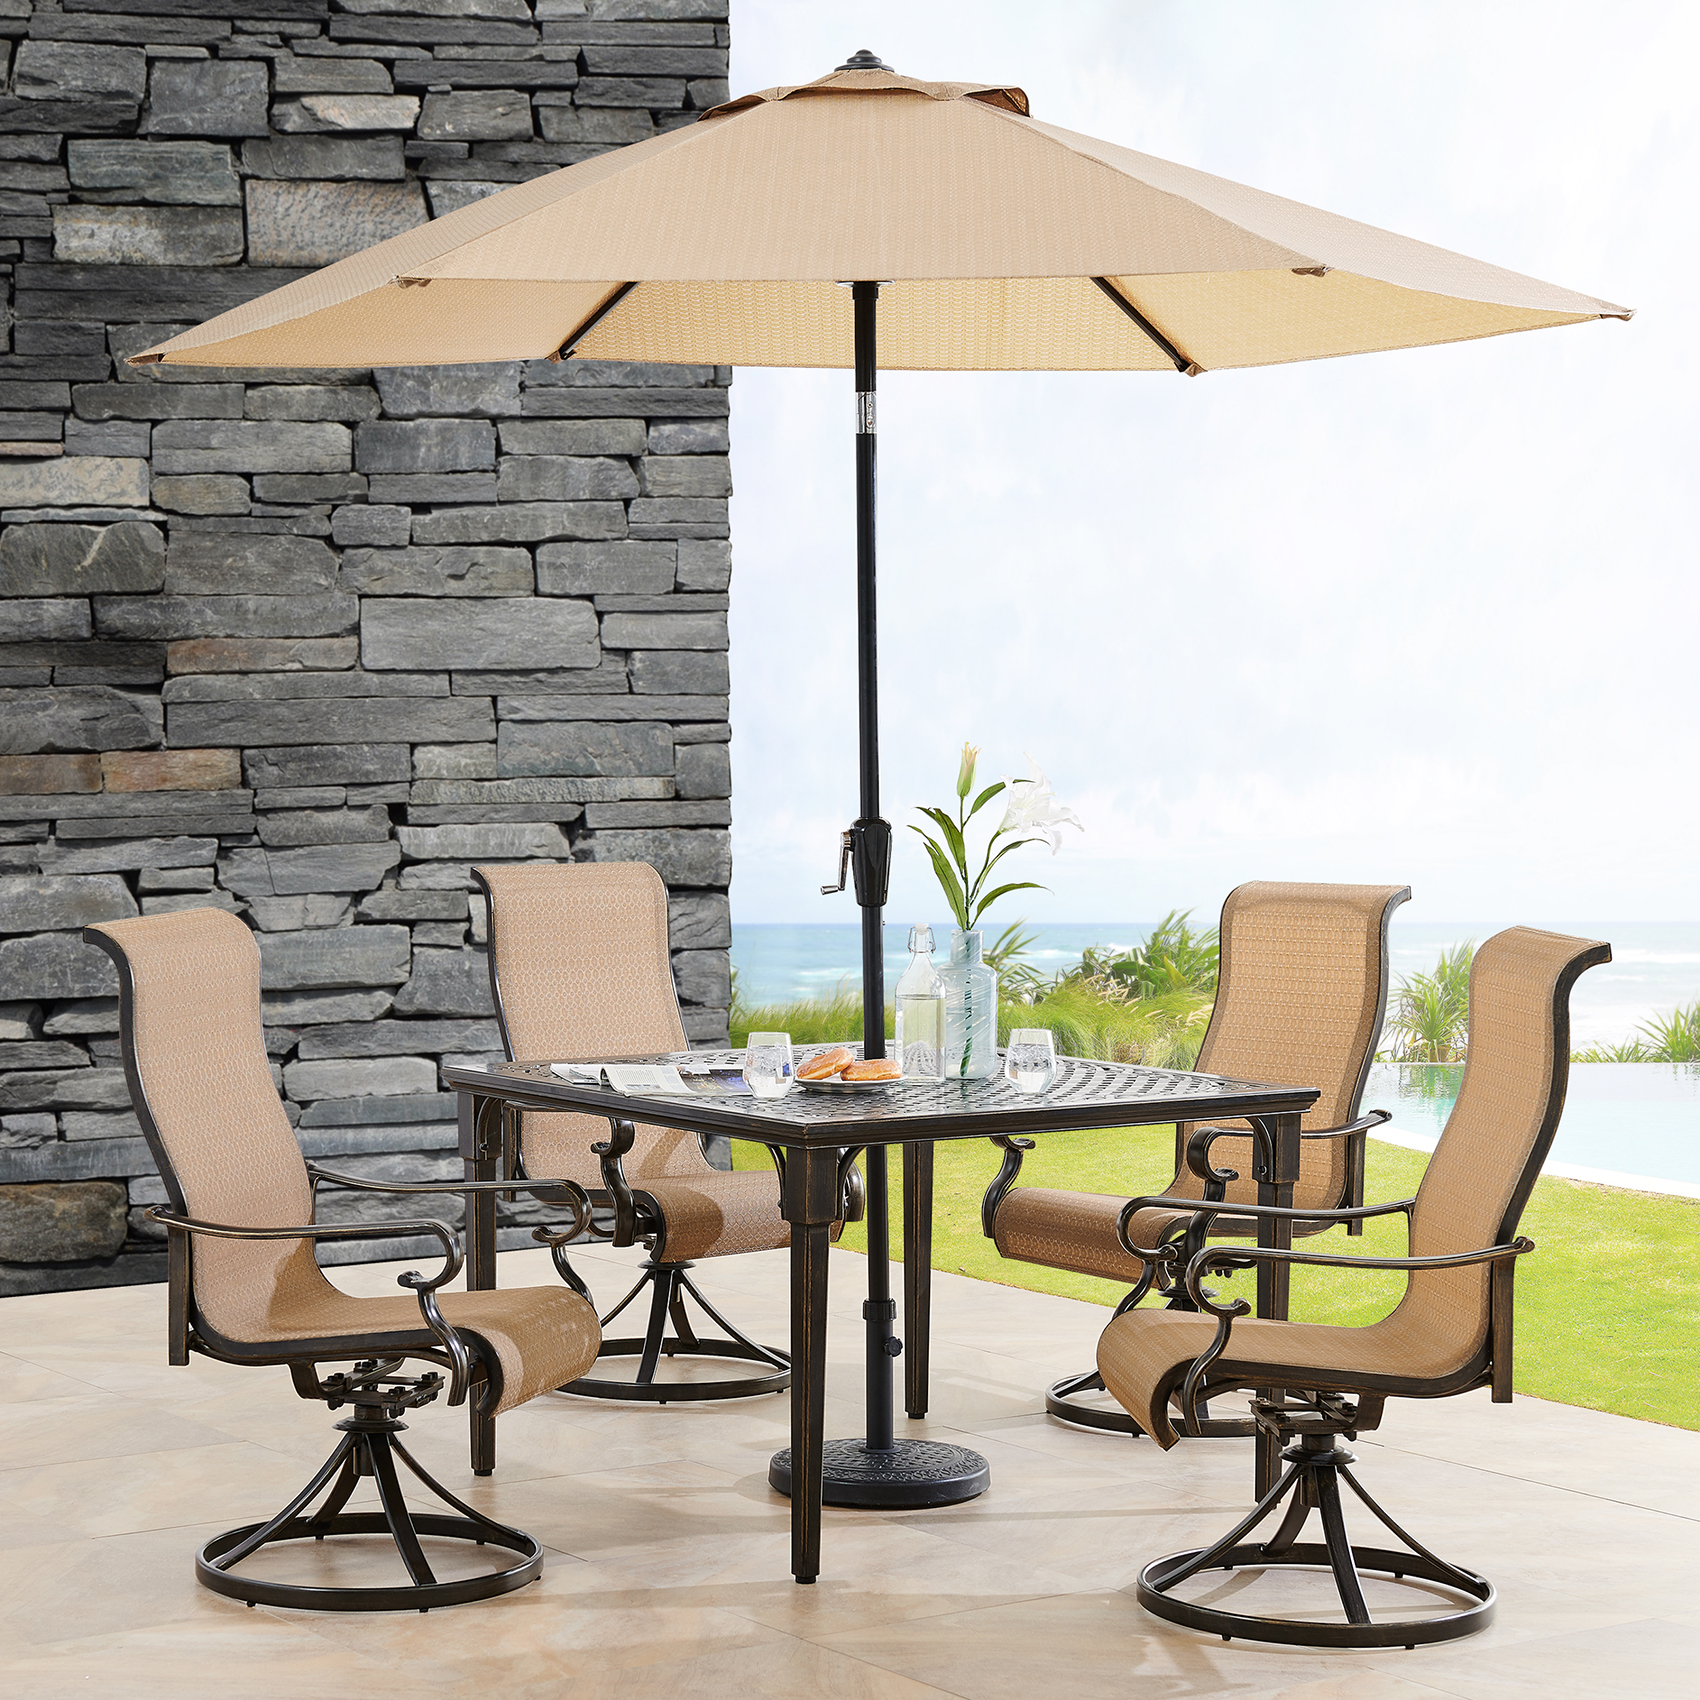 Hanover Brigantine 5-Piece Modern Outdoor Dining Set with 9 Ft. Umbrella | 4 Contoured Swivel Rocker Chairs | 42'' Square Cast-Top Table | Weather, Rust, UV Resistant | Tan/Bronze | BRIGDN5PCSWSQ-SU - image 2 of 10